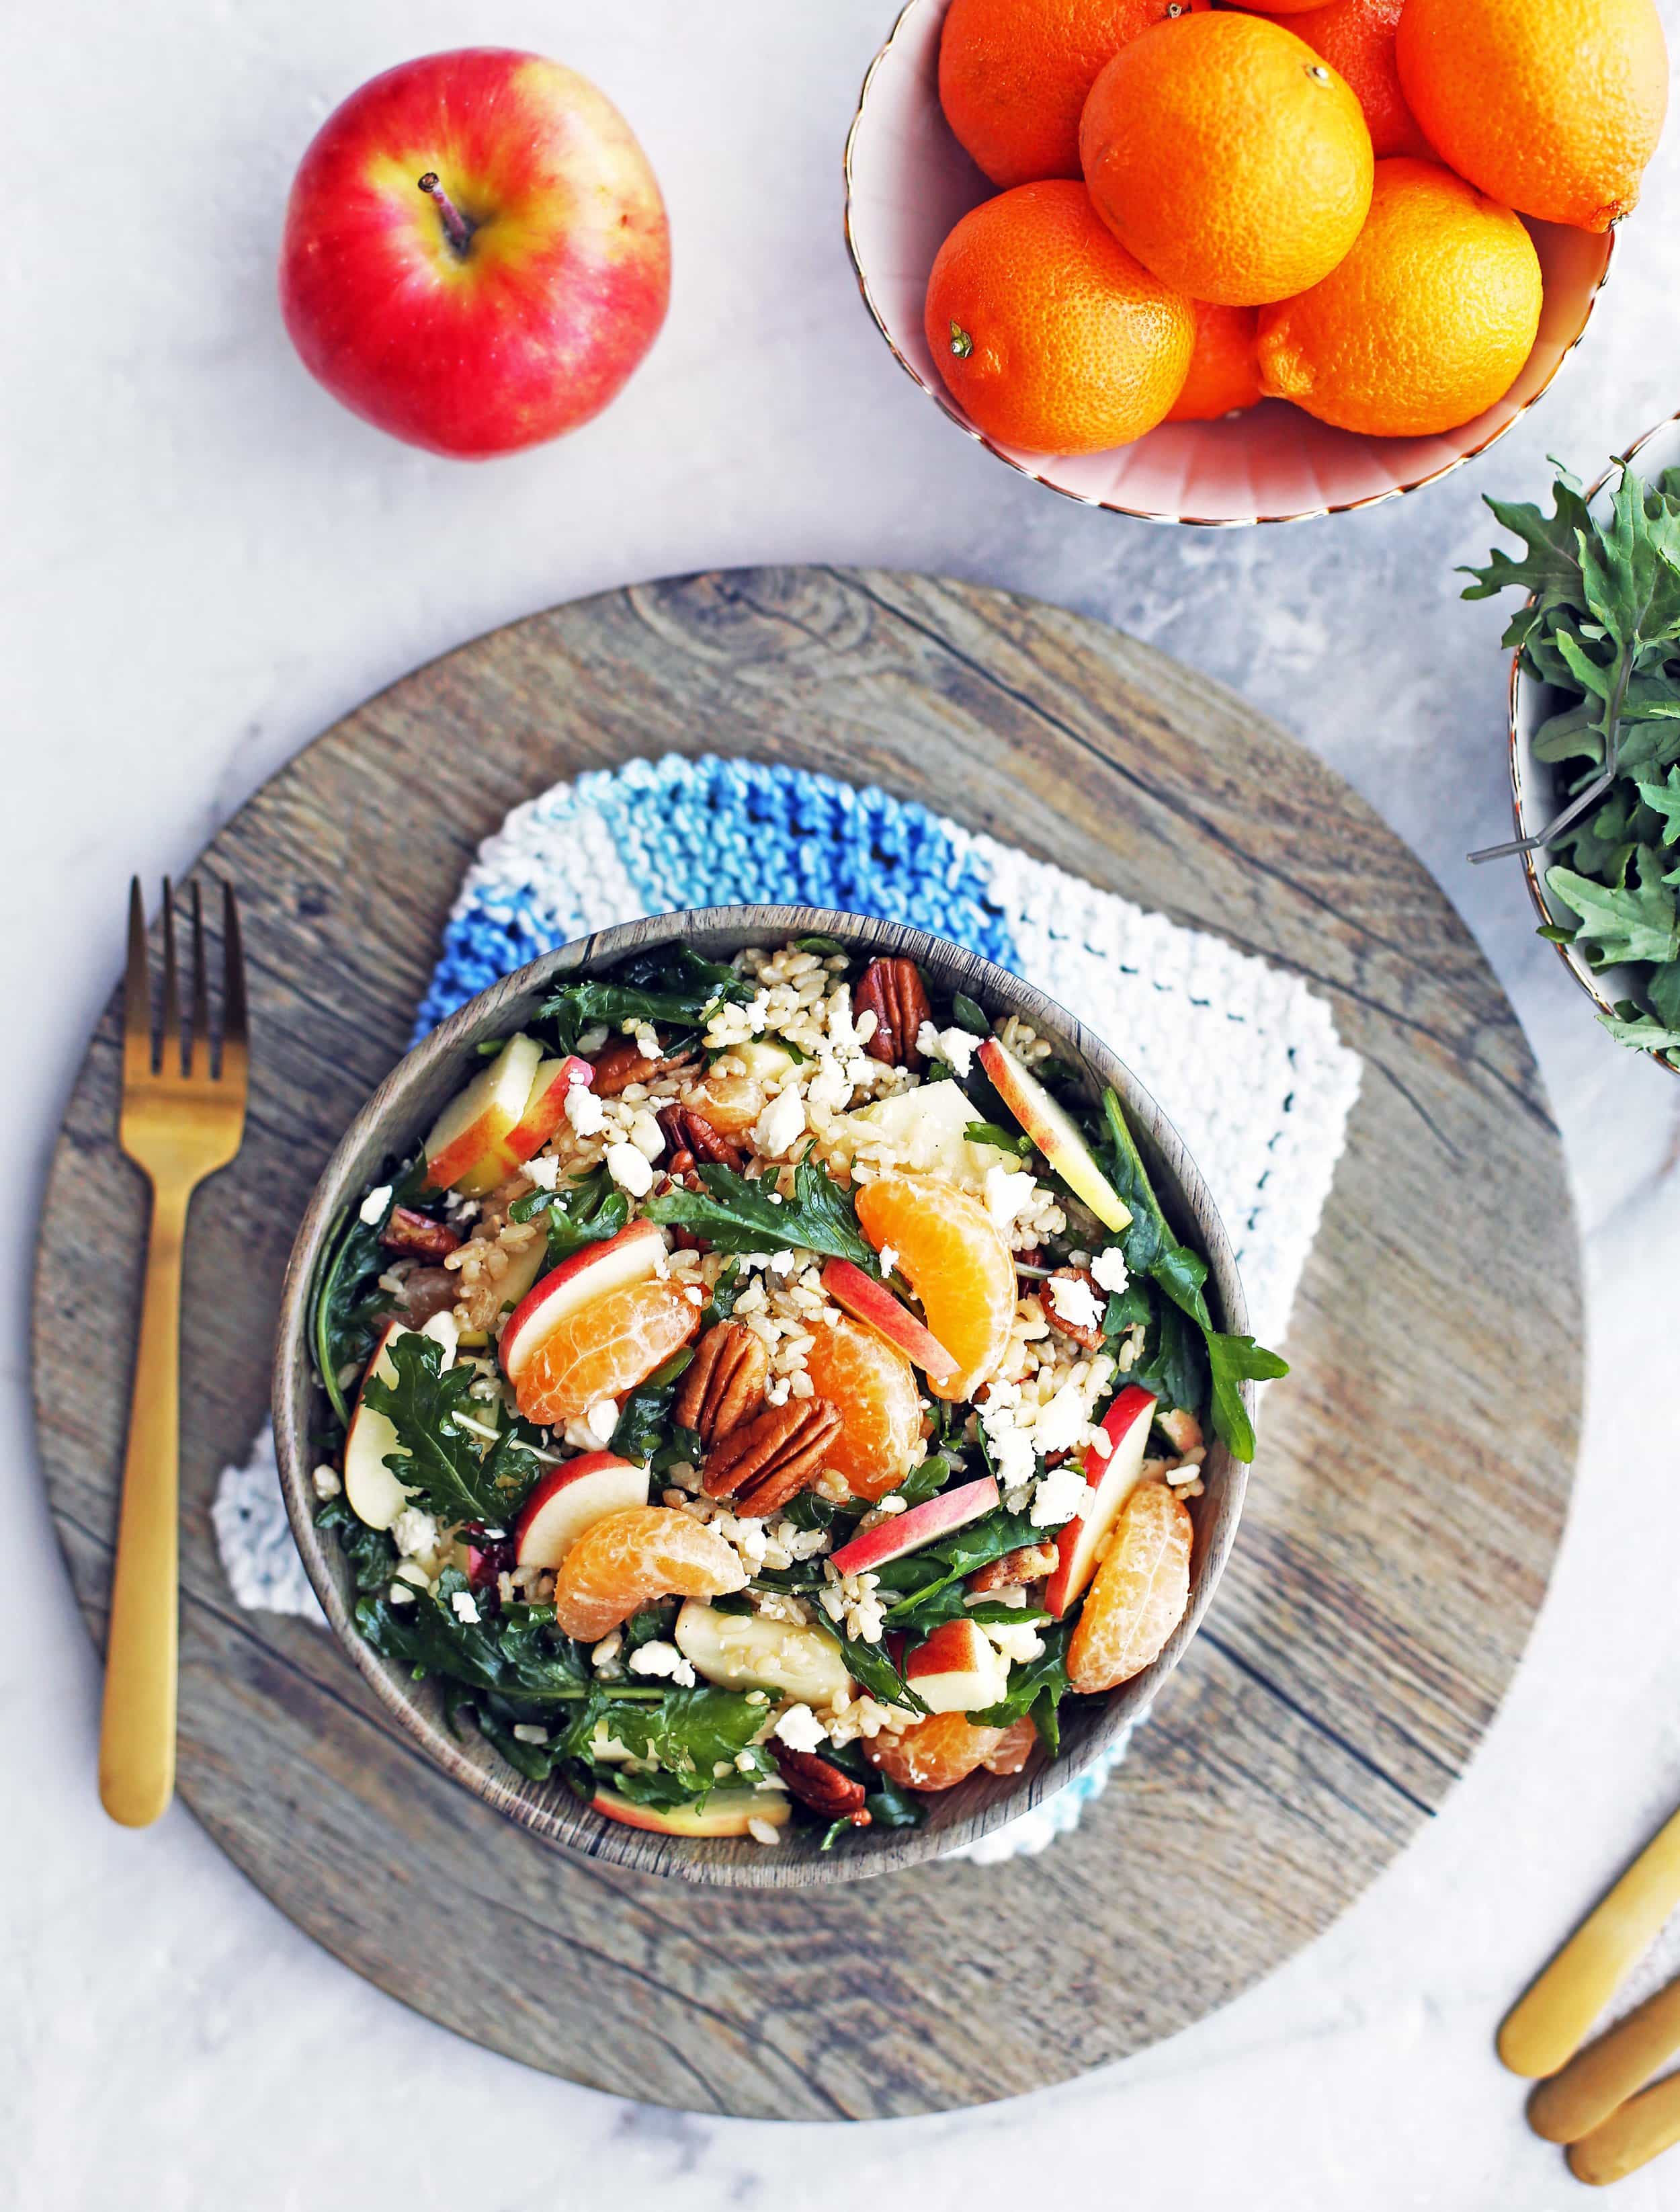 Overhead view of baby kale brown rice salad with feta, apples, and clementines in a wooden bowl, with fork to its side, on a large wooden platter.